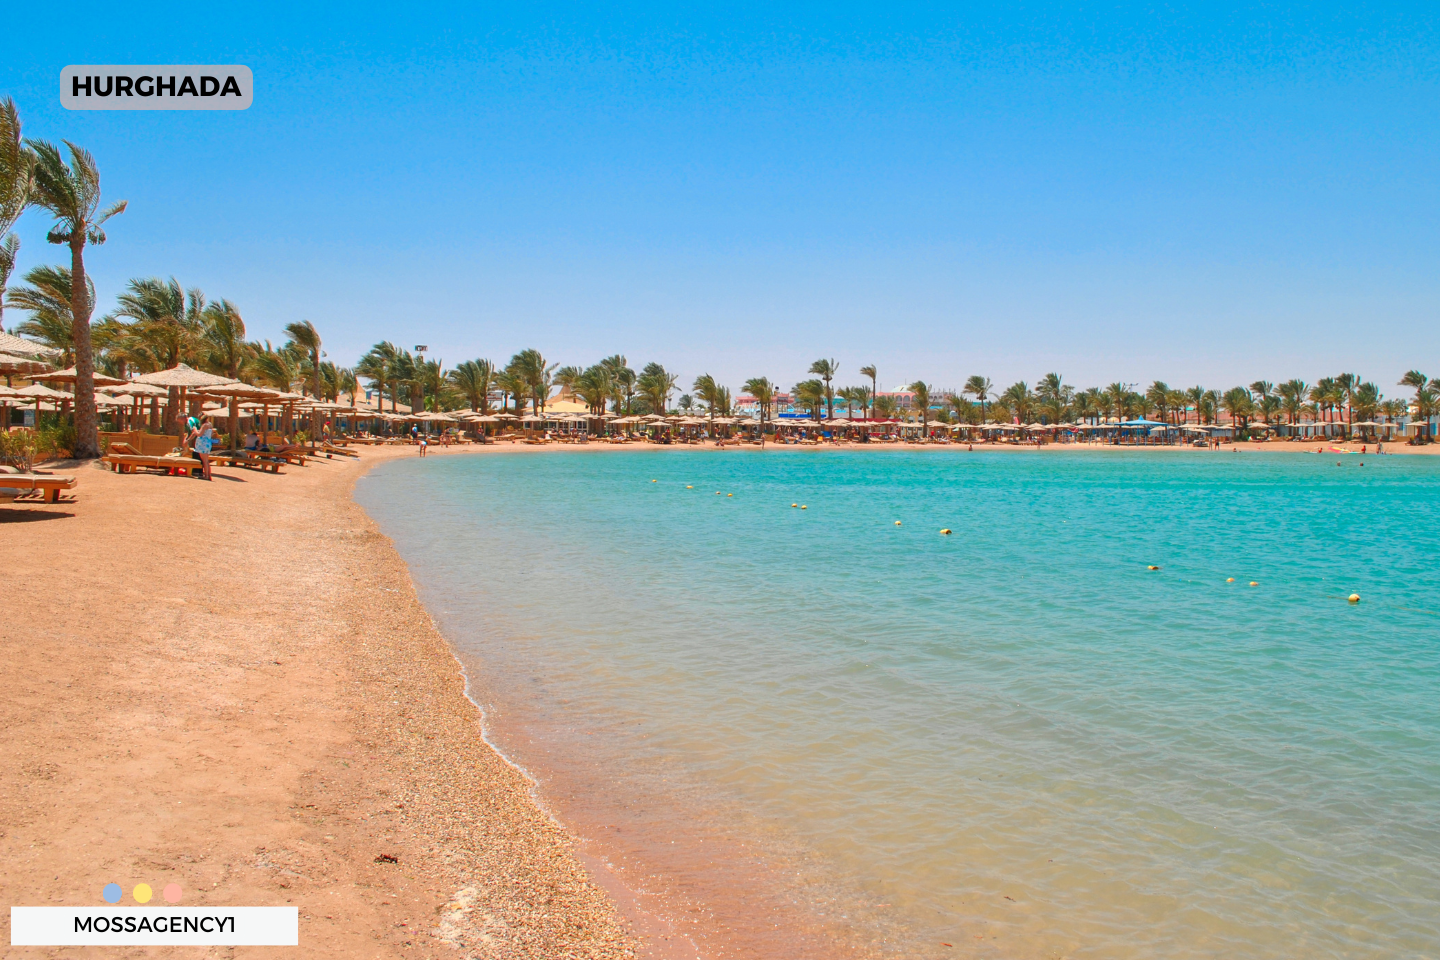 The Beauty of Hurghada: Red Sea Paradise